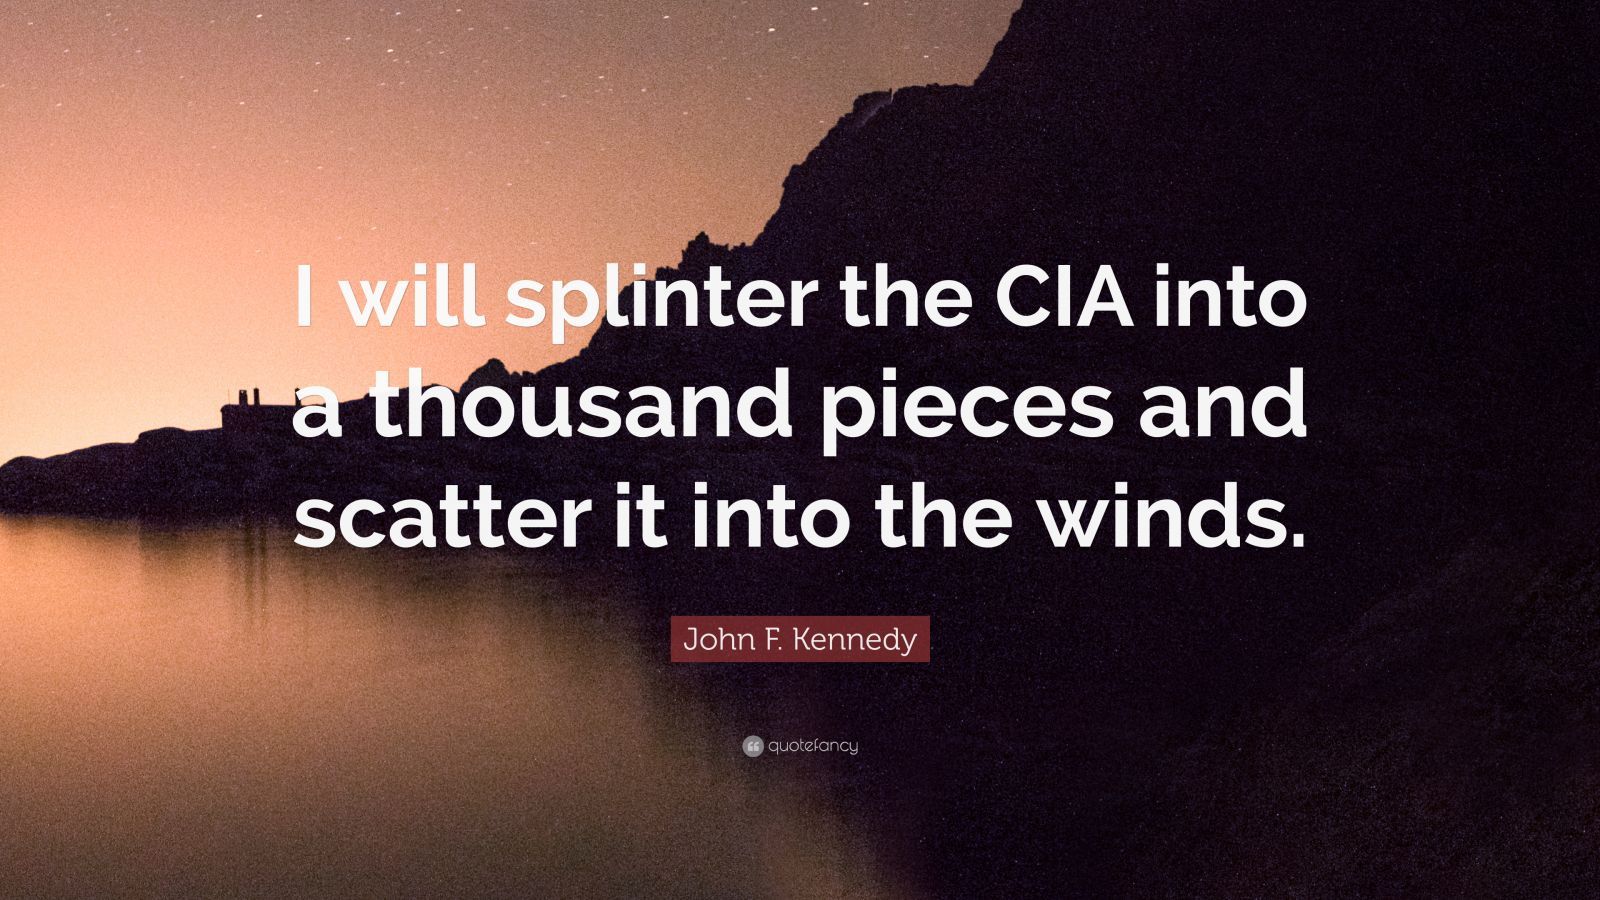 JFK had a tenuous relationship with the CIA, and...